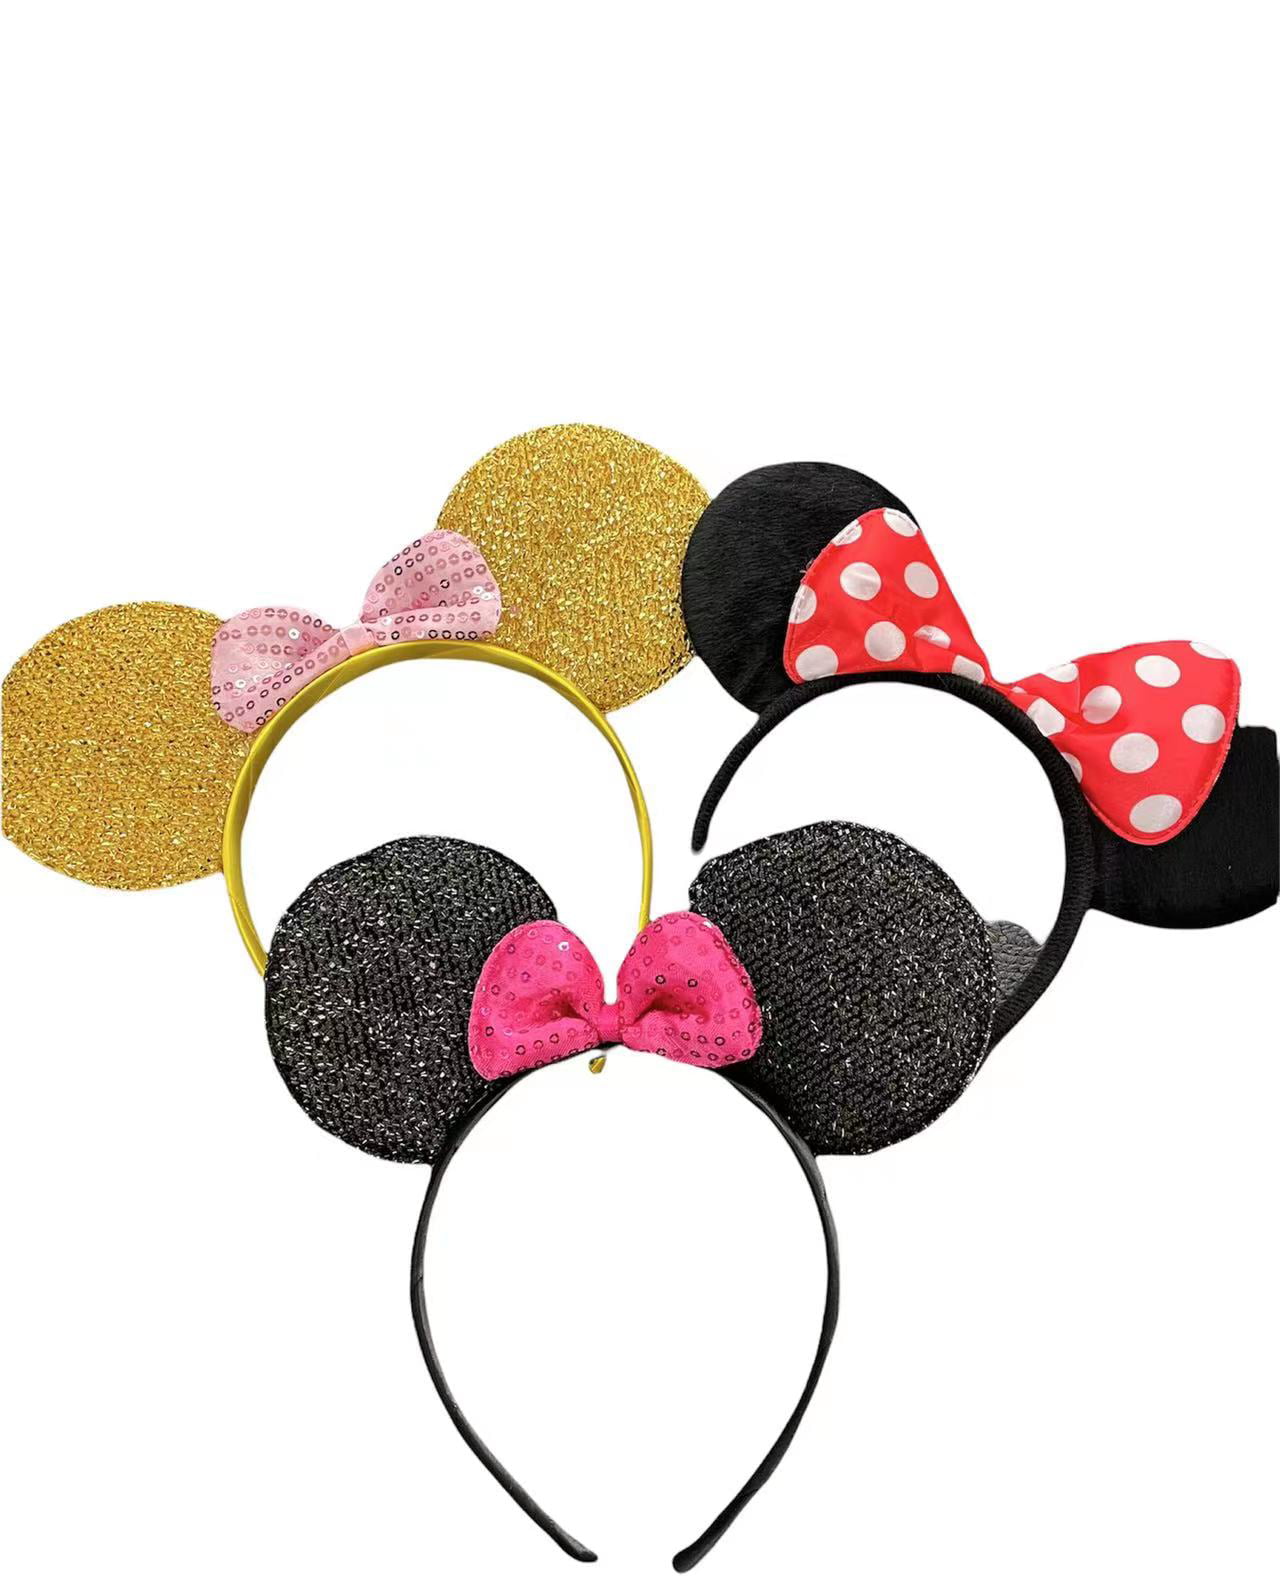 USA seller Details about   Minnie Mickey Mouse Ears 12pc Headbands Black Pink Polka Dot Bow 